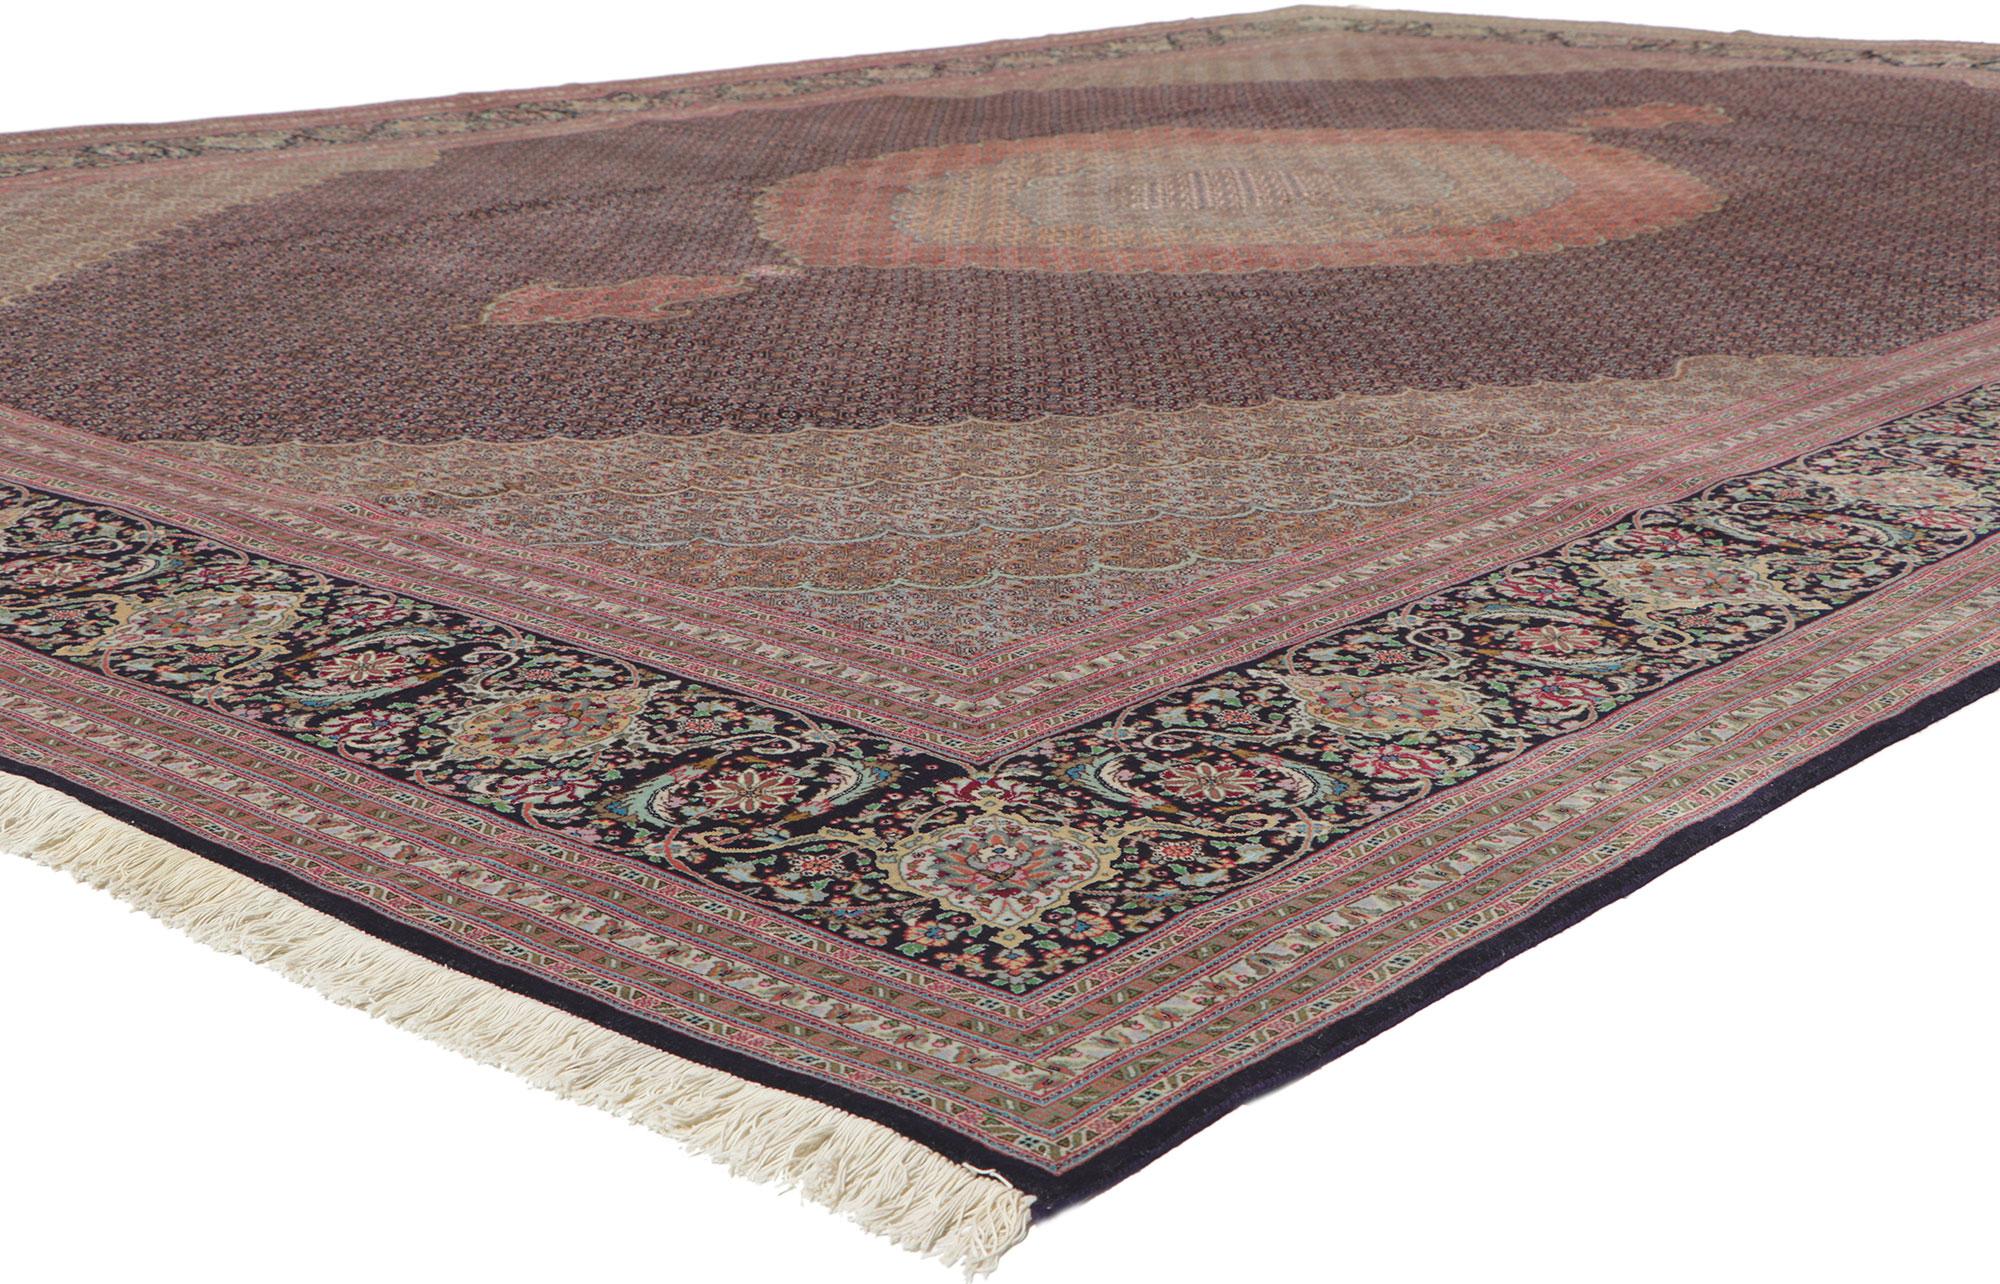 78332 Vintage Persian Tabriz wool and silk rug, 11'04 x 16'05. With ornate details and striking appeal, this wool and silk vintage Persian Tabriz rug astounds with its beauty. The small-scale Herati pattern and sophisticated color palette woven into